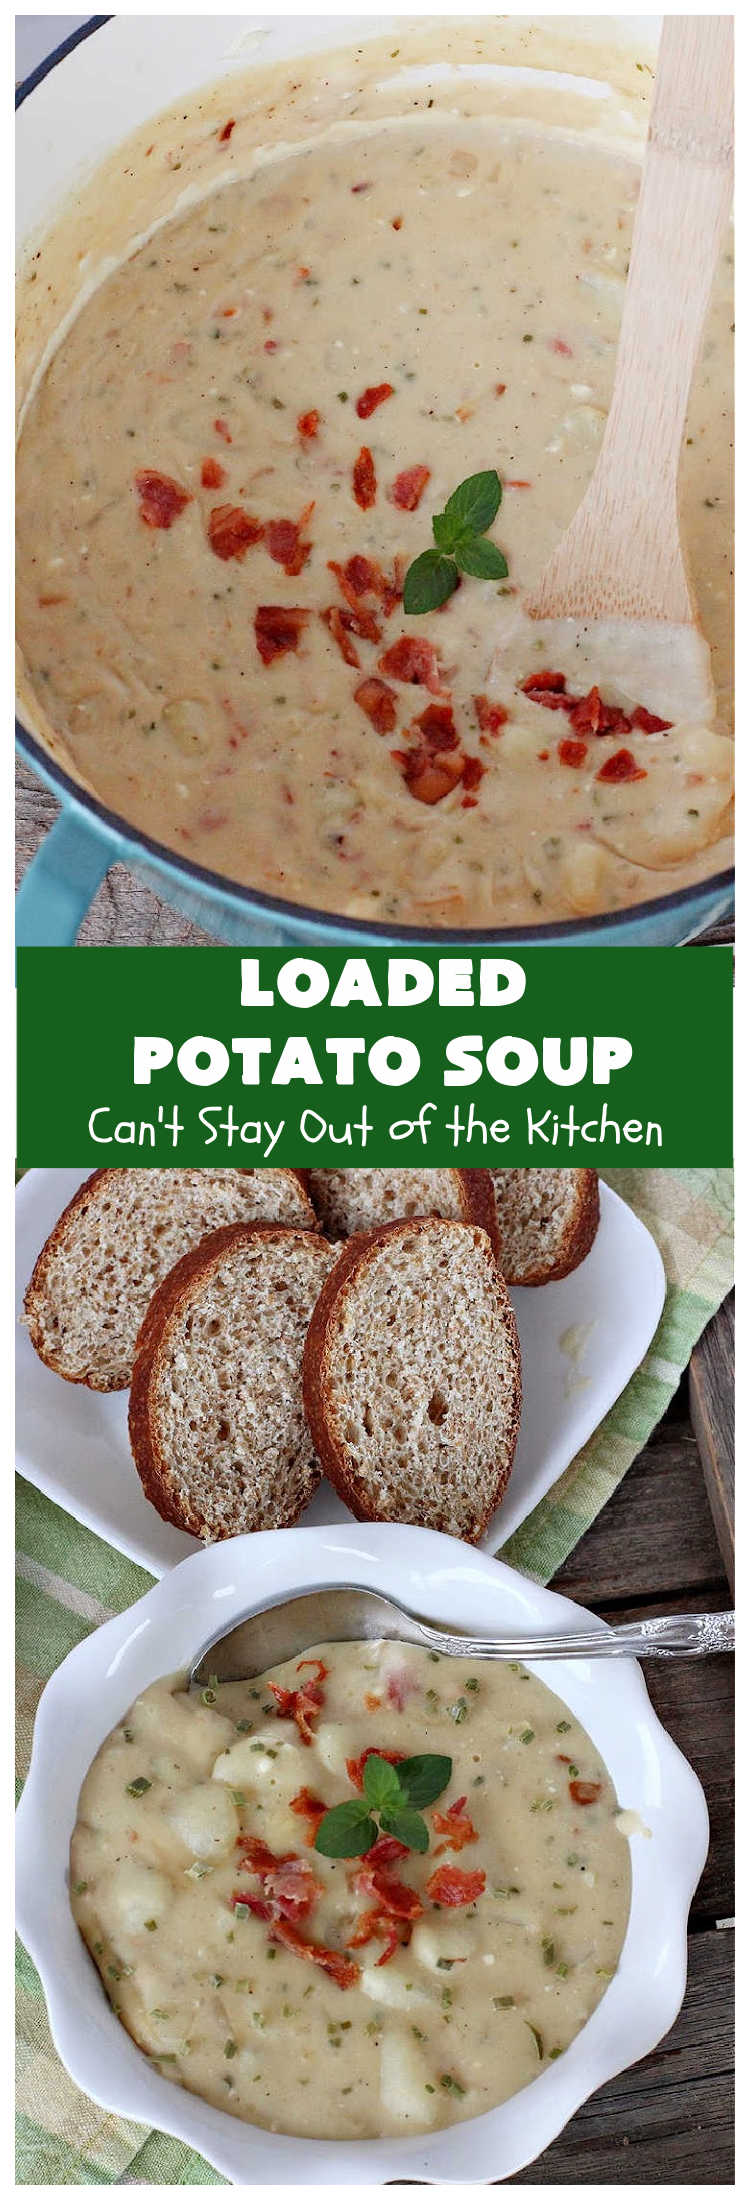 Loaded Potato Soup | Can't Stay Out of the Kitchen